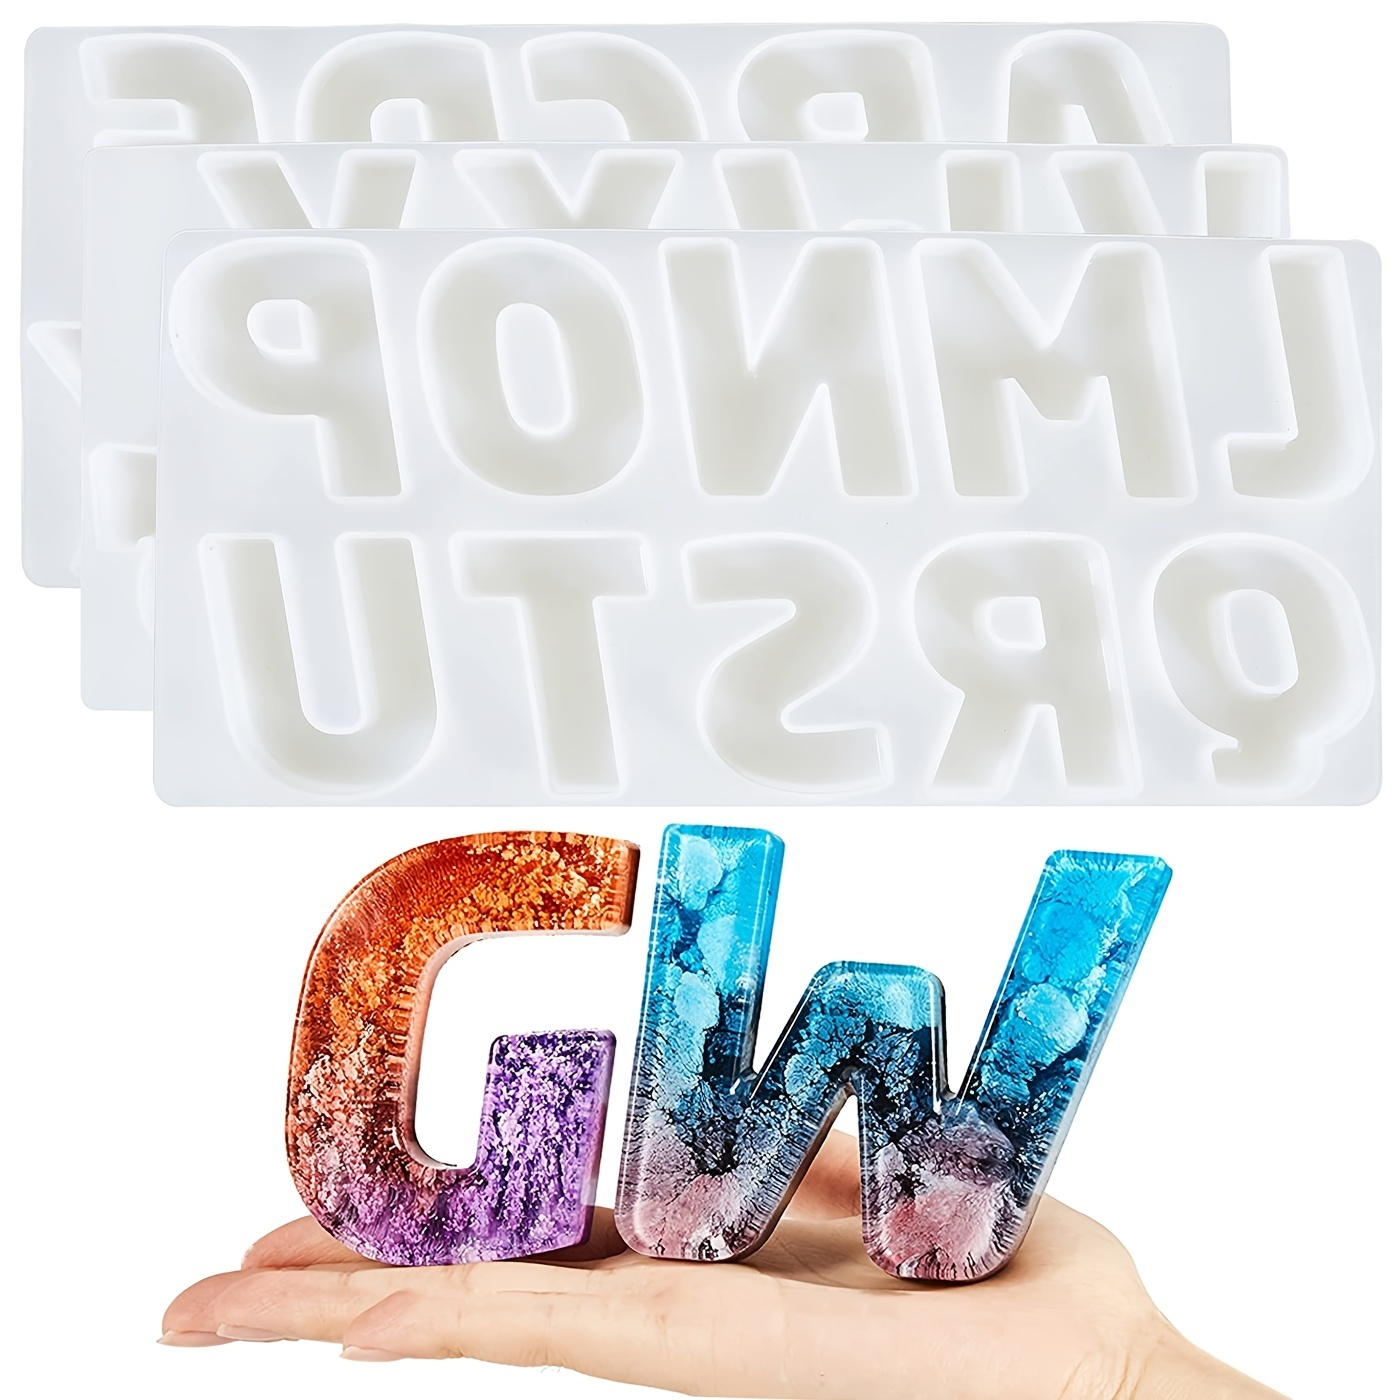 Large Resin Letter Molds Silicone Proxy Resin Color Letter 1mm 3D Creative  Resin Molds Silicone Resin For DIY Topper Decoration Craft Gifts Resin  Casting Epoxy Resin Molds For DIY Resin Home 